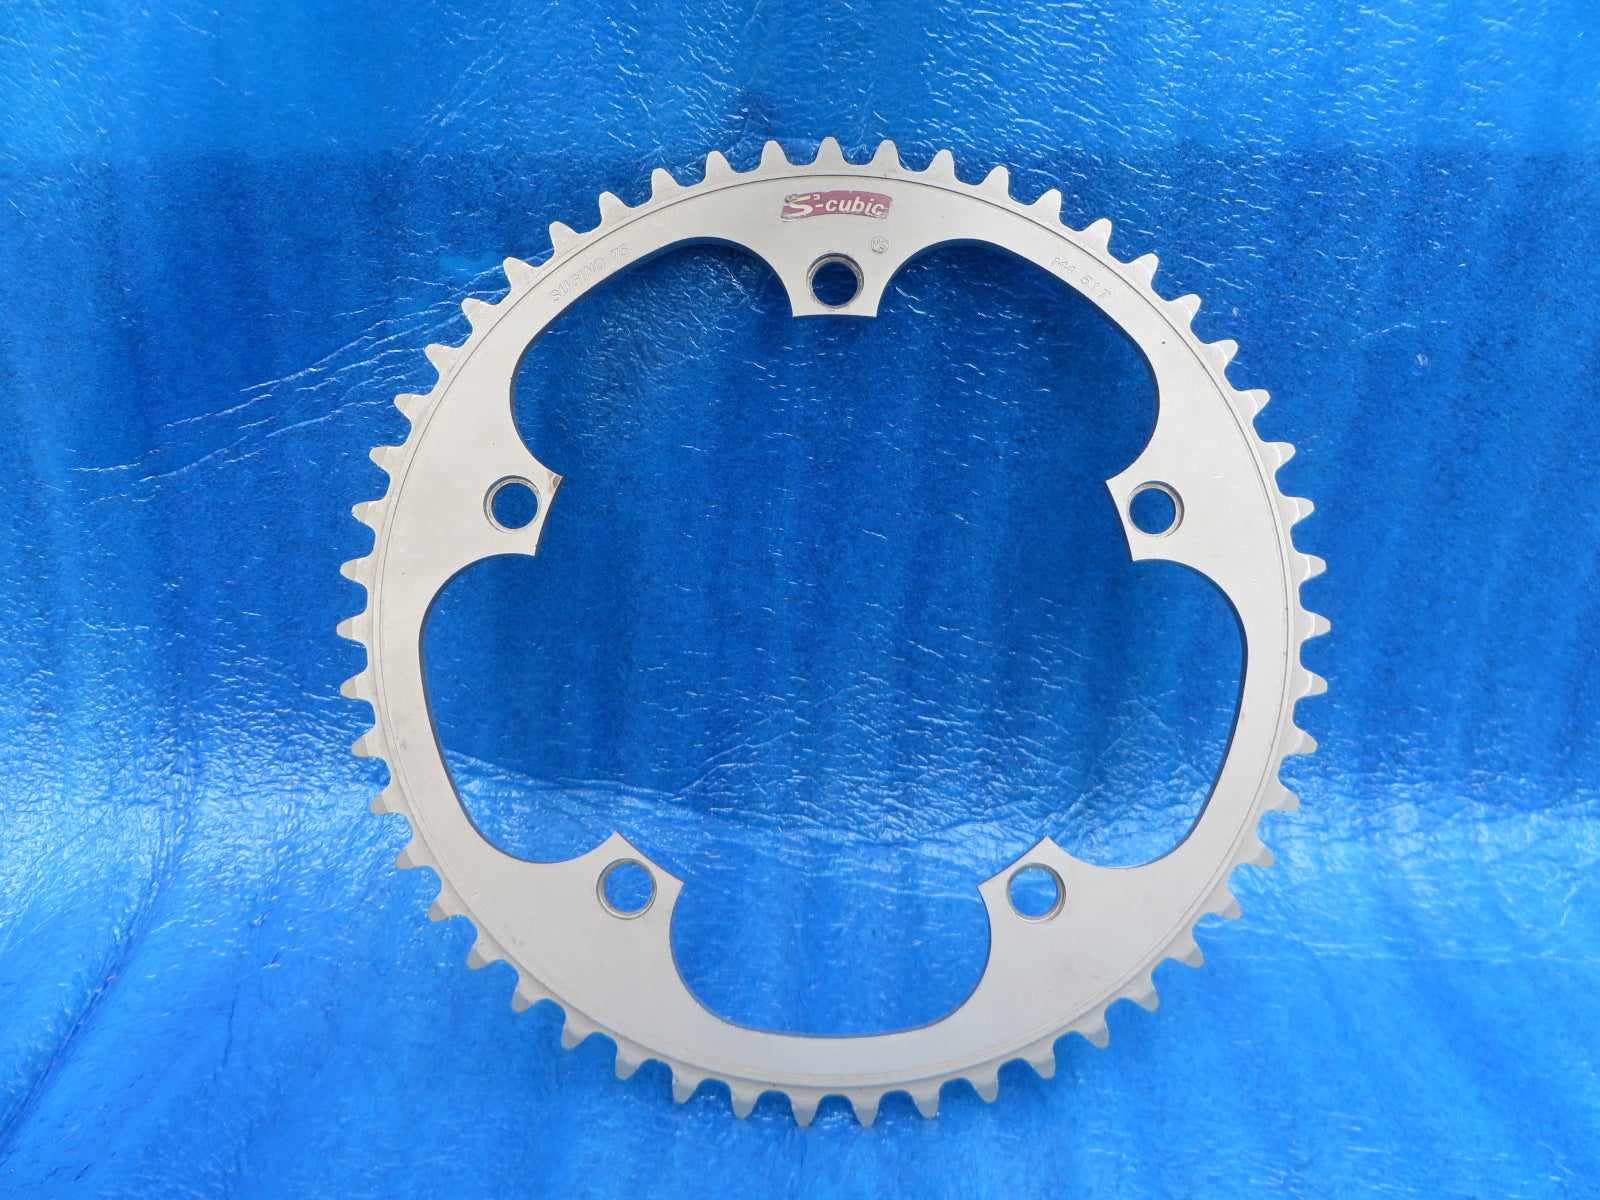 Sugino S-cubic 1/8" 144BCD NJS Chainring 51T Matte Finish (20101051)